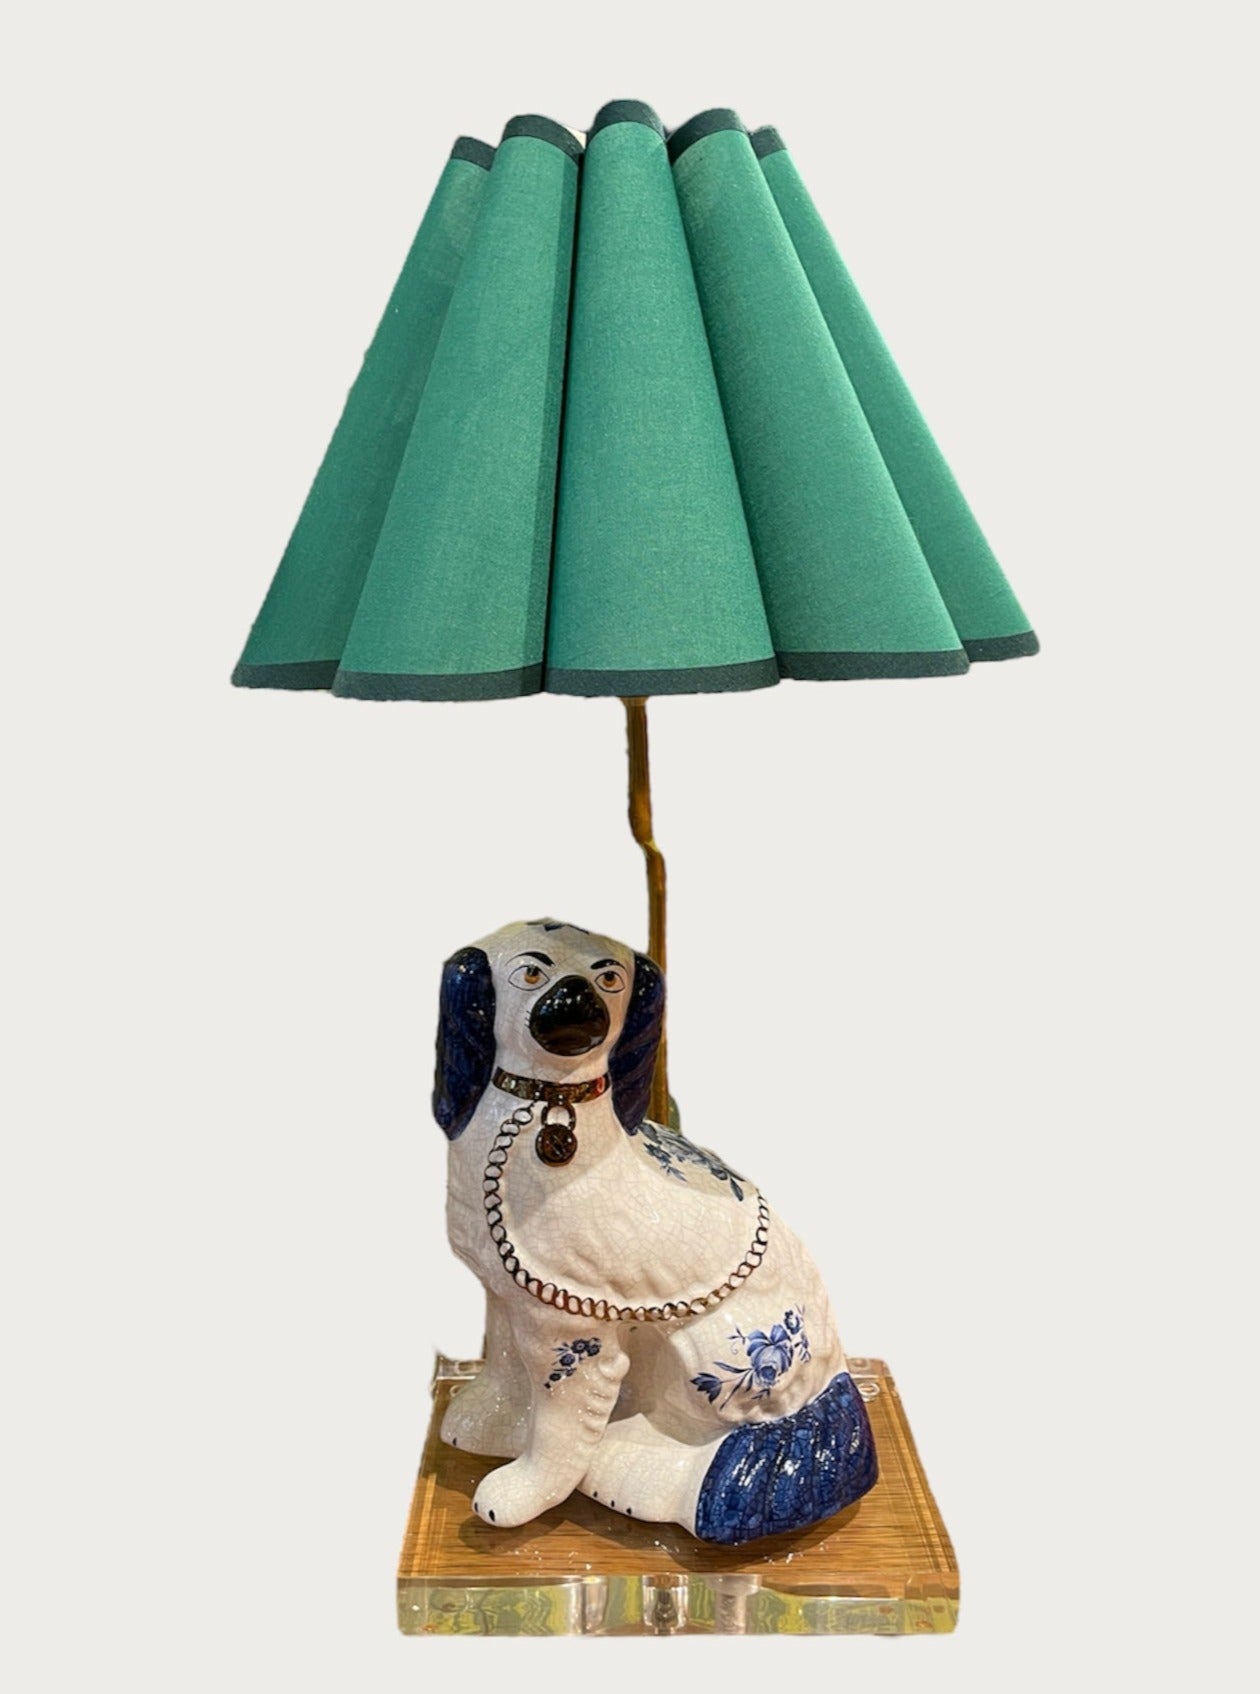 PAIR OF BLUE AND WHITE STAFFORDSHIRE STYLE PORCELAIN DOG LAMPS WITH GREEN RUFFLE SHADES